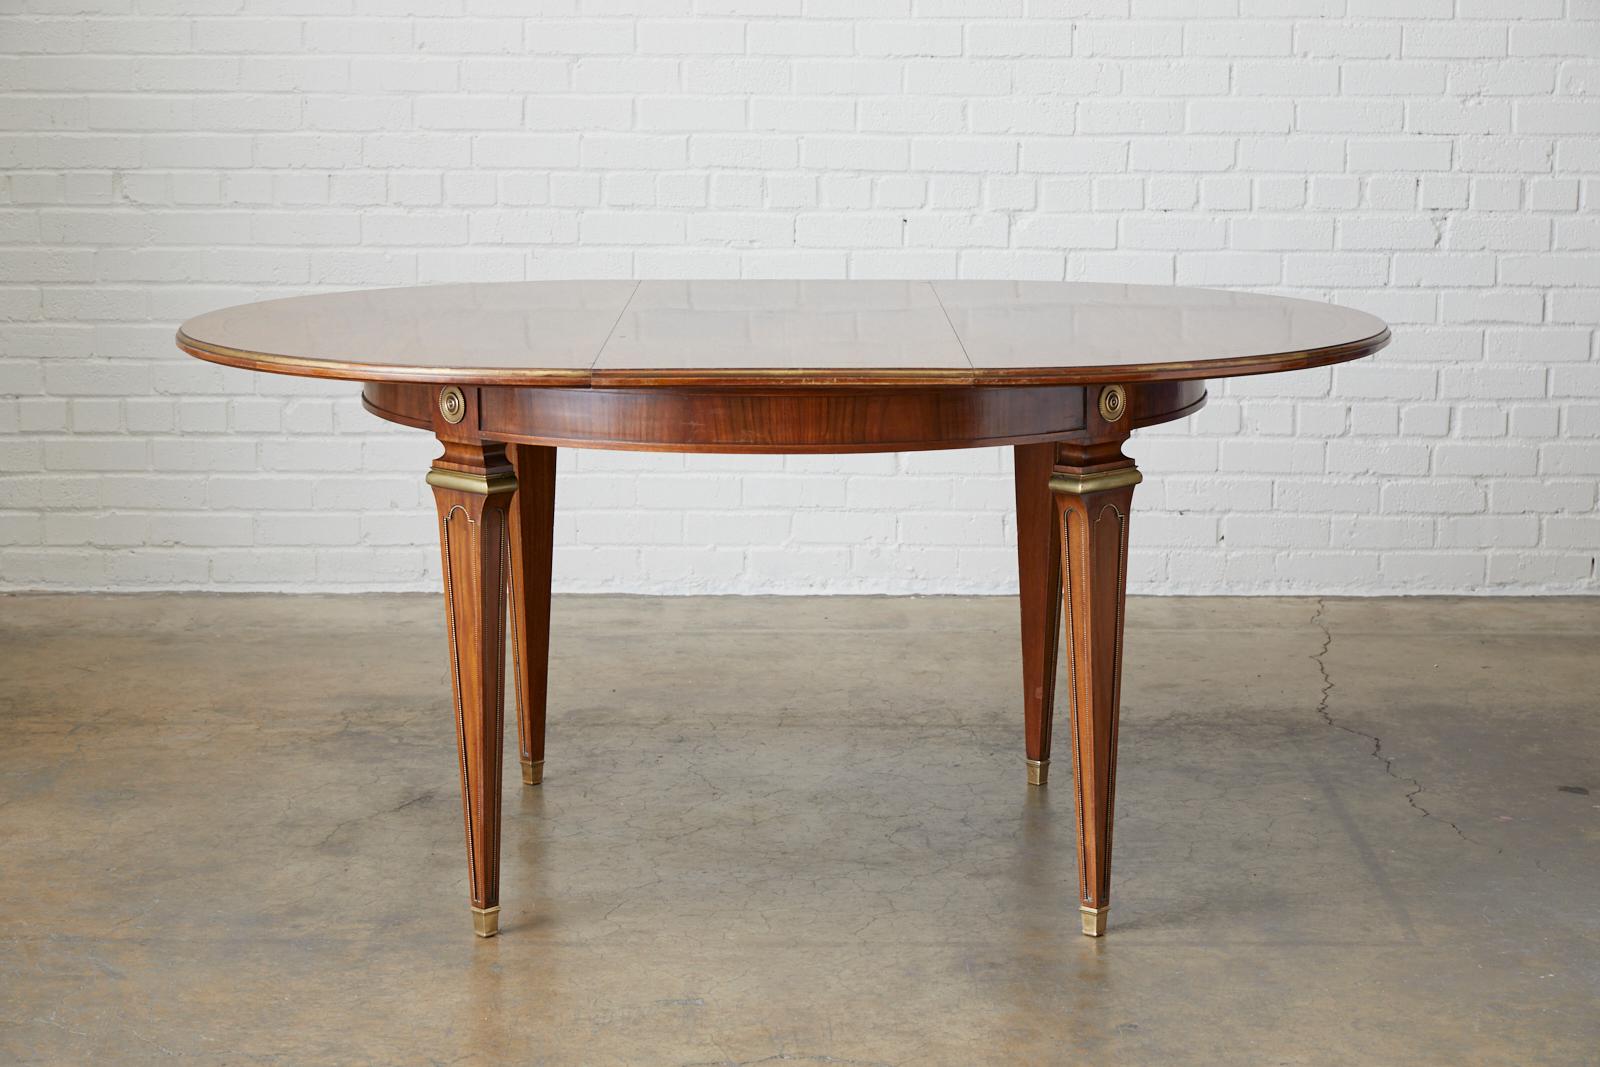 Louis XVI Maison Jansen Round Mahogany Dining Table with Leaf